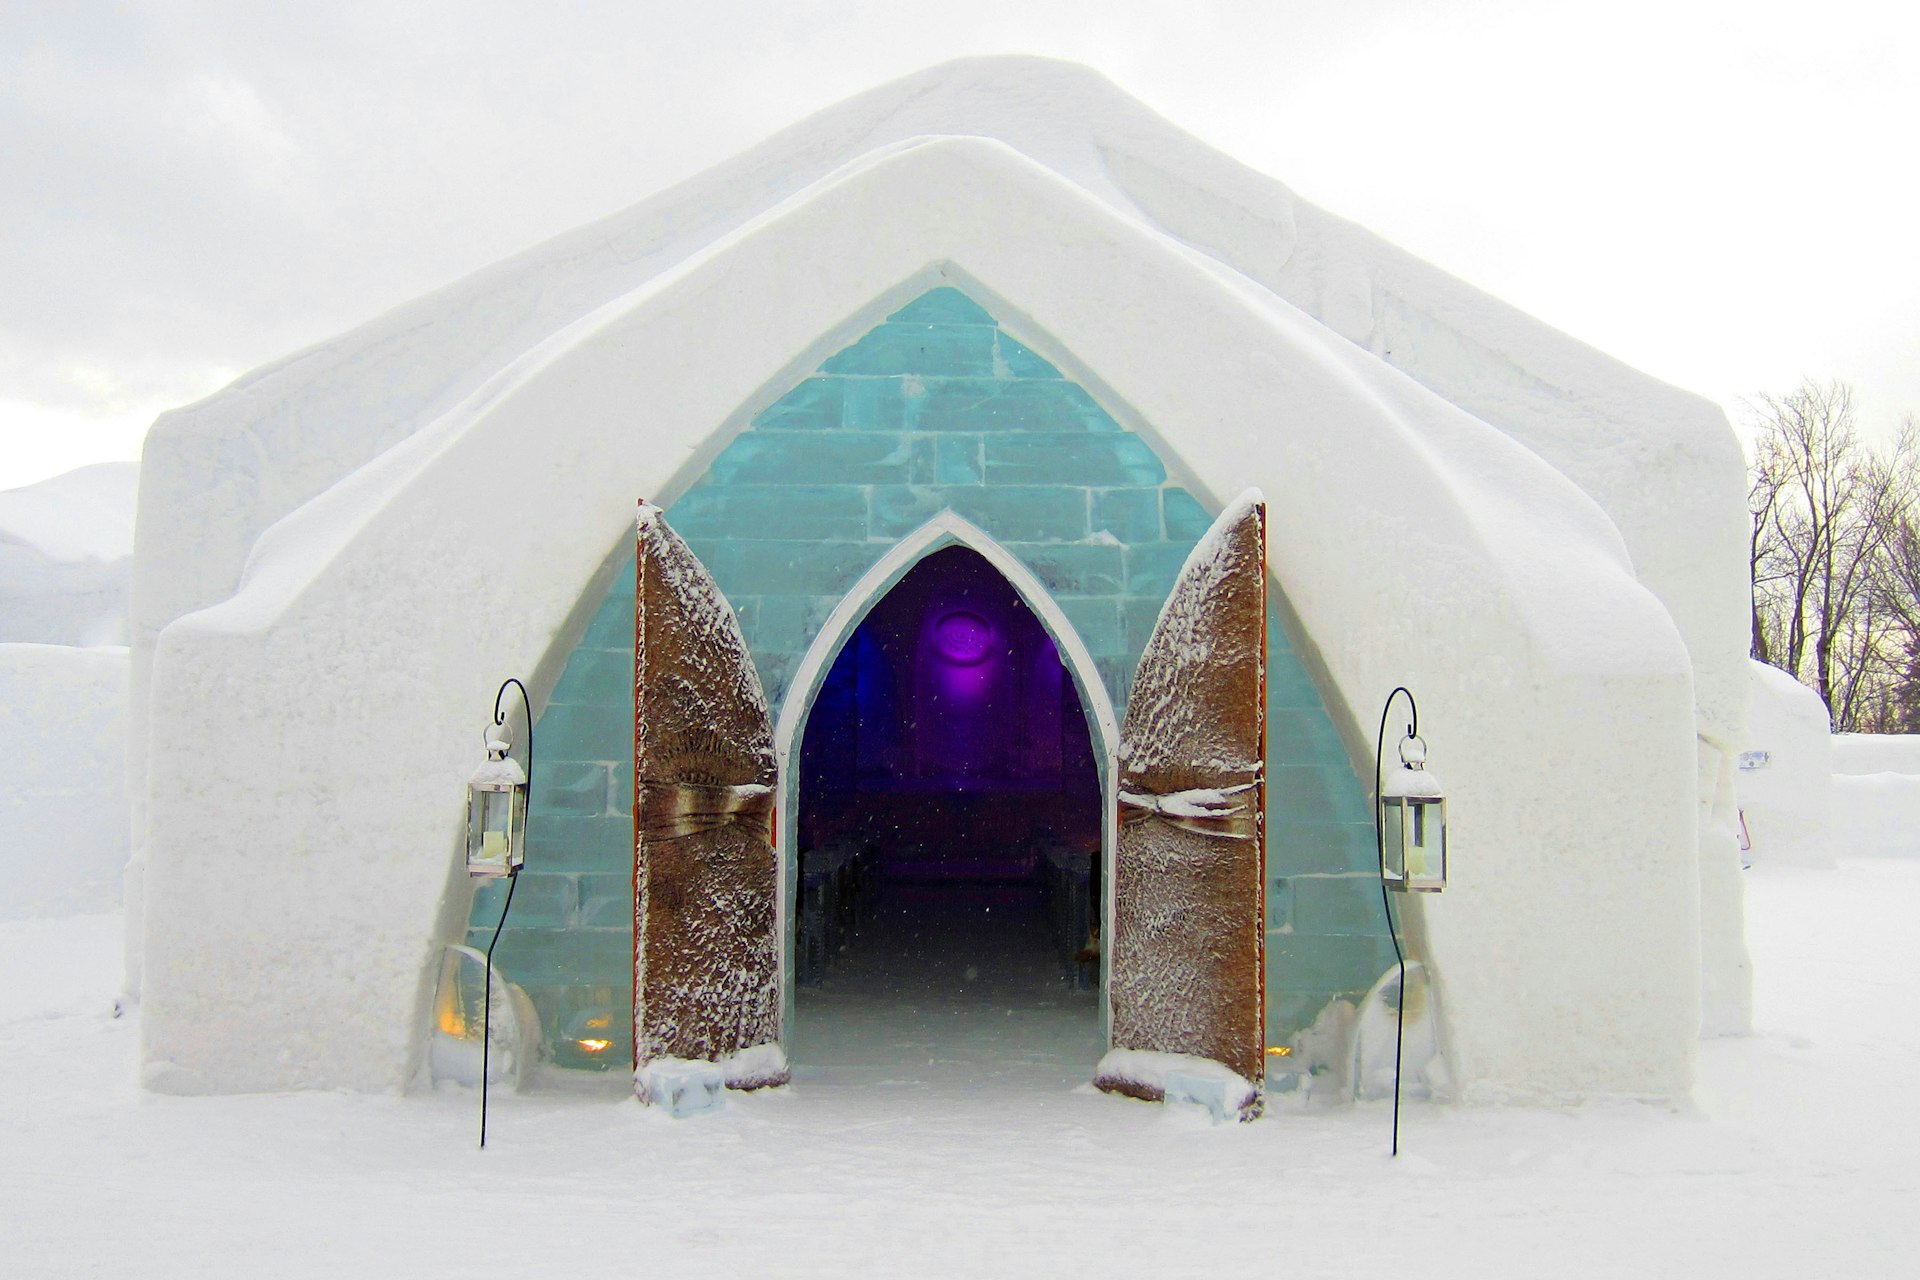 An igloo has its doors open in the Hotel de Glace